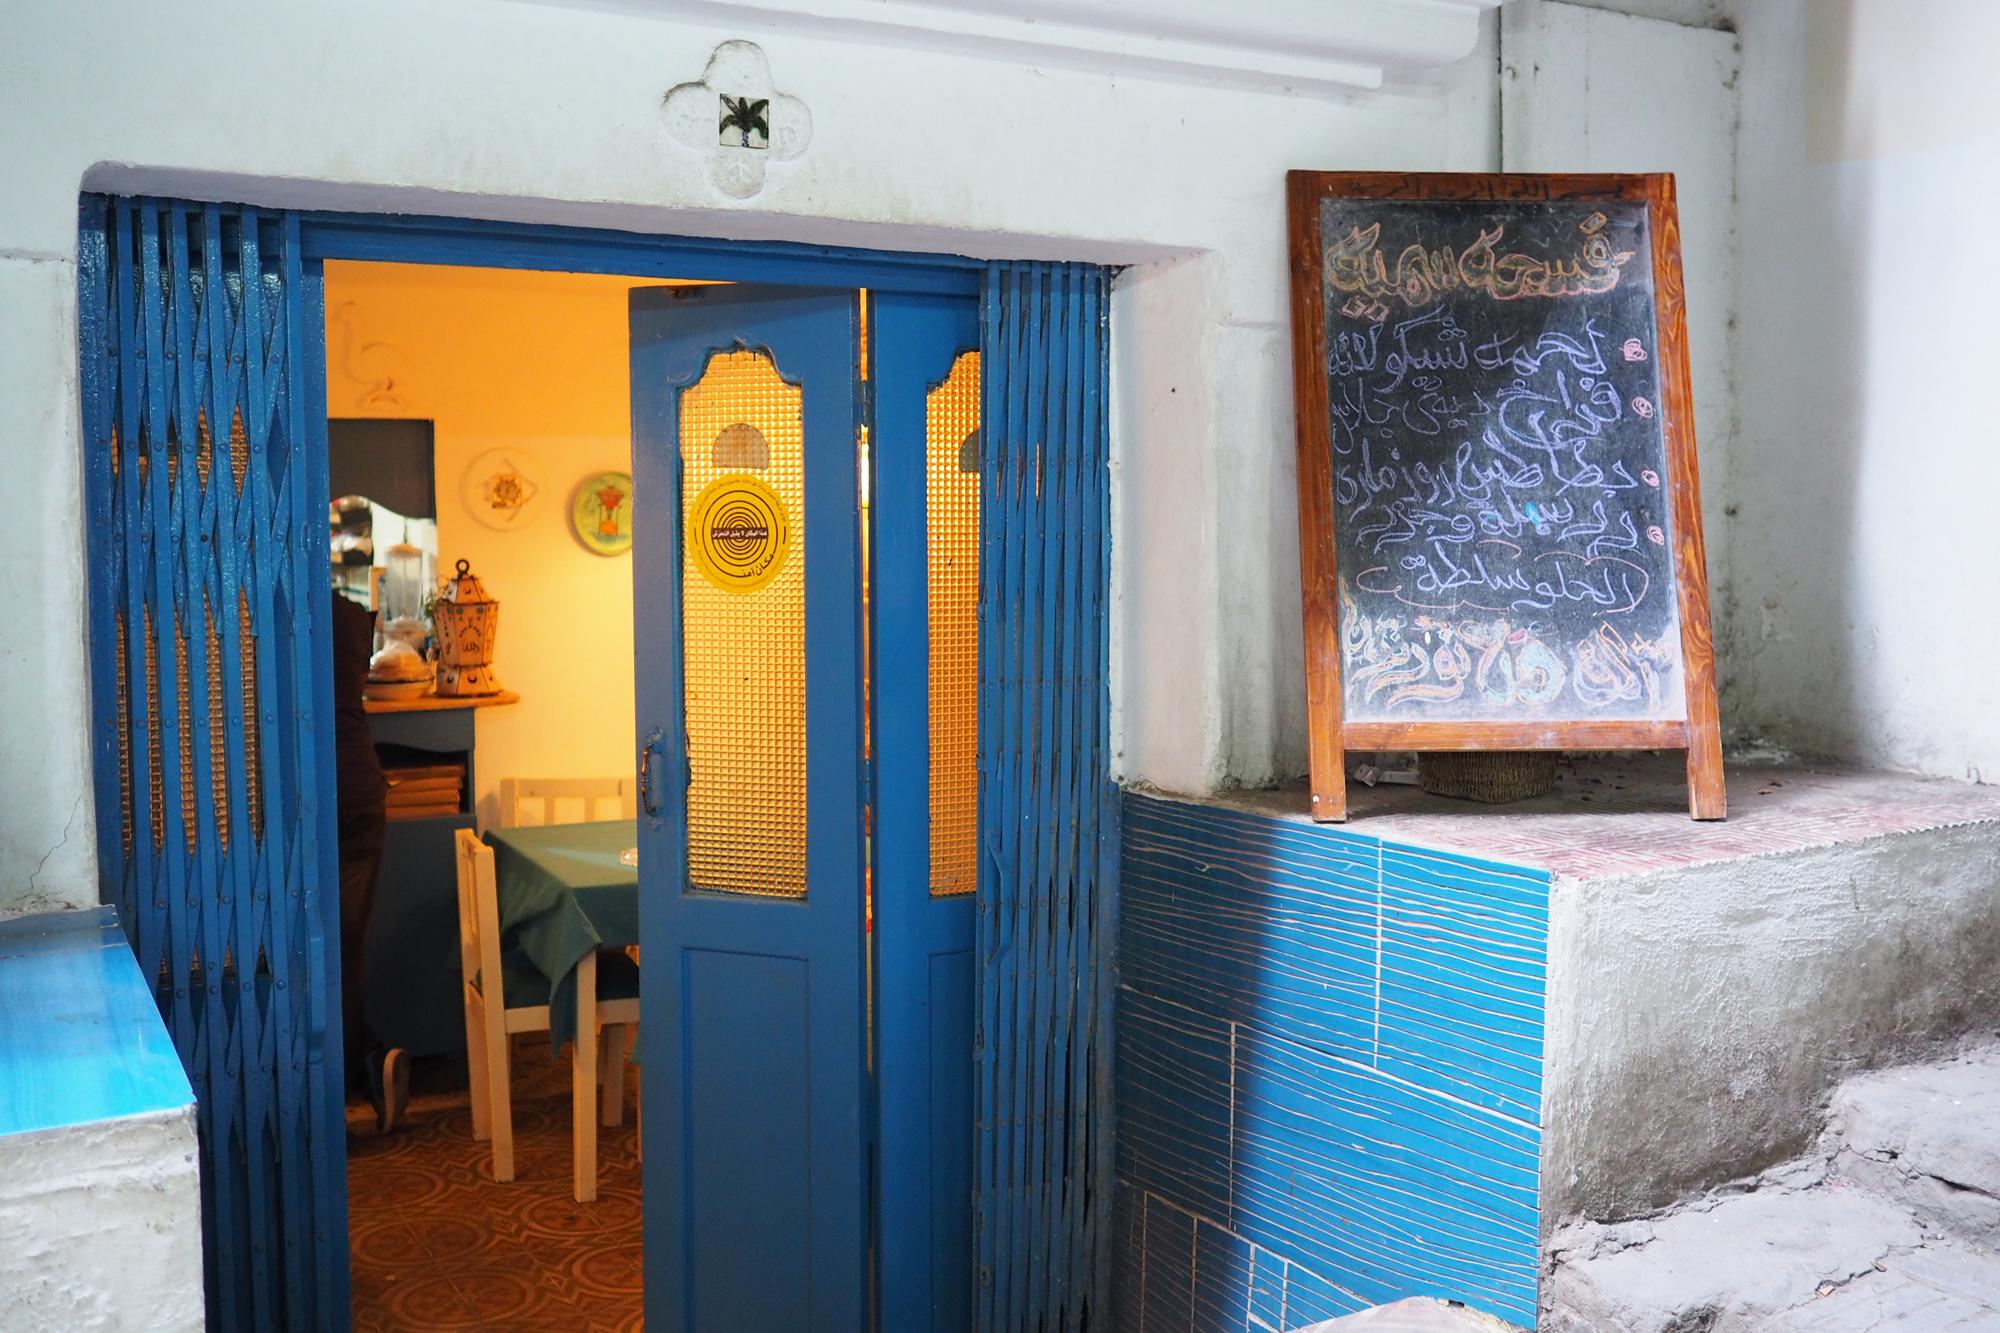 Fashet Somaya is just one downtown Cairo restaurant helping to put Egyptian cuisine on the map